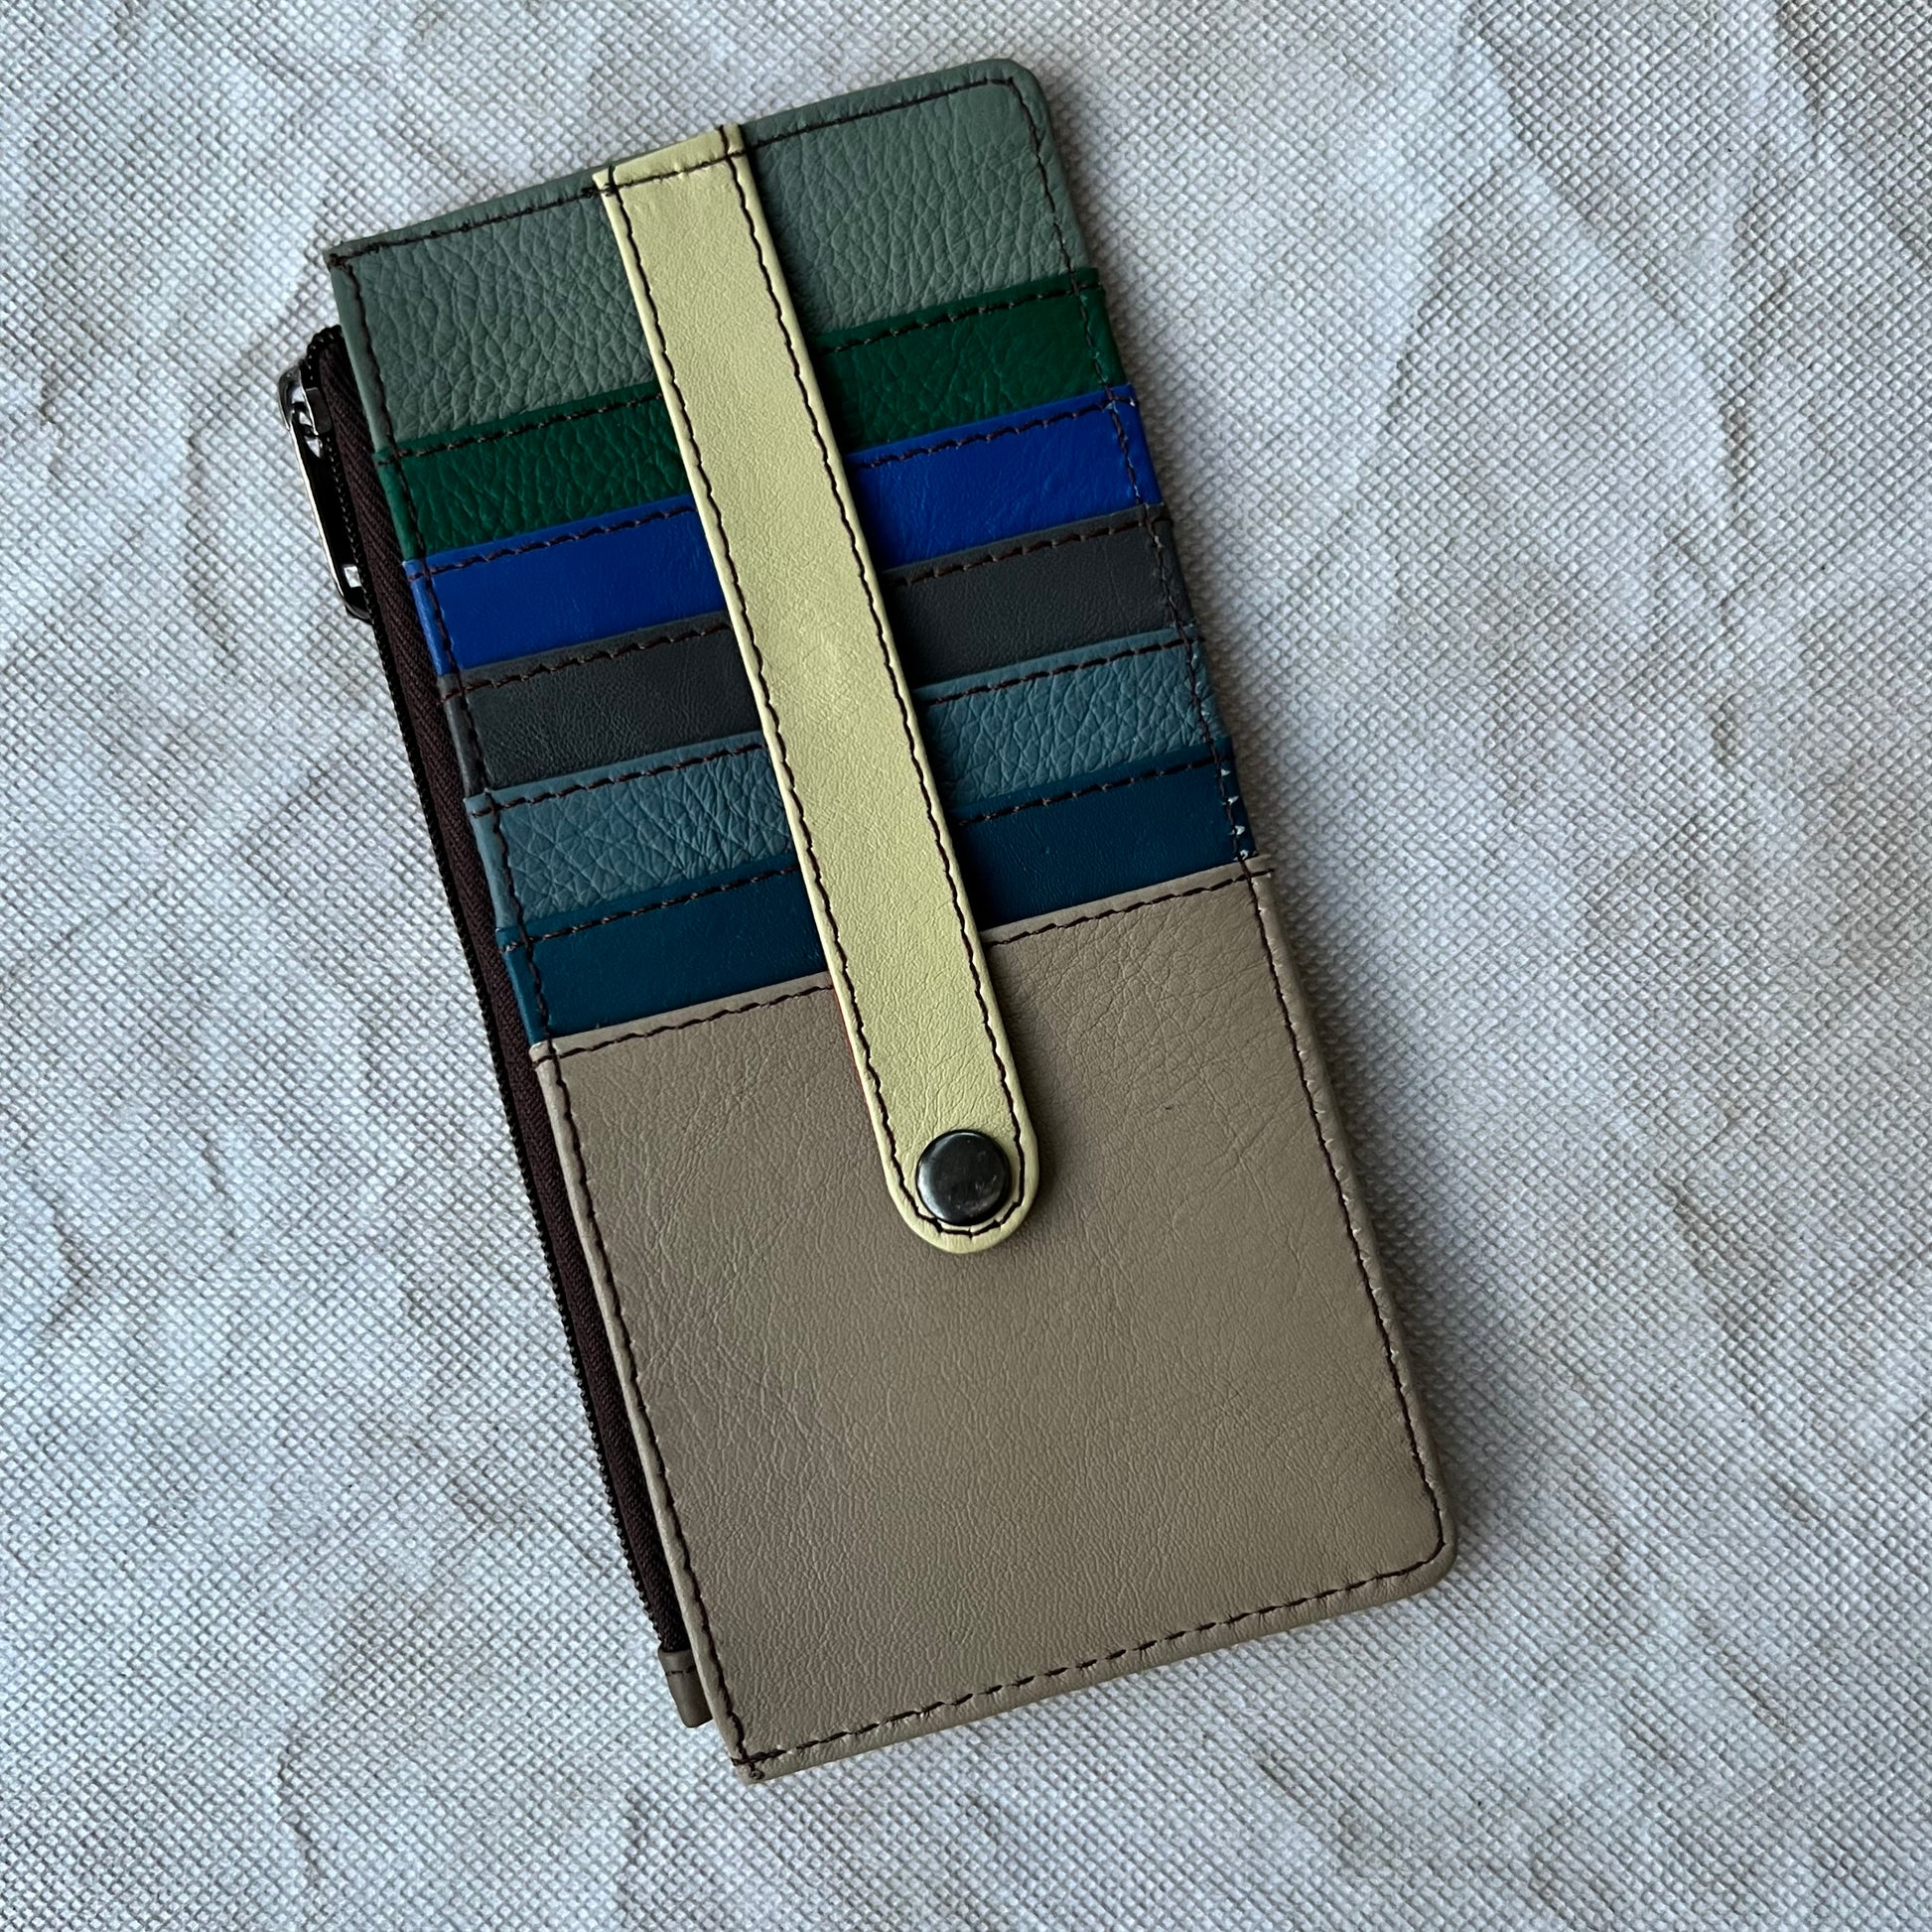 card holder with colorful card slots, snap tab, and side zipper pocket.